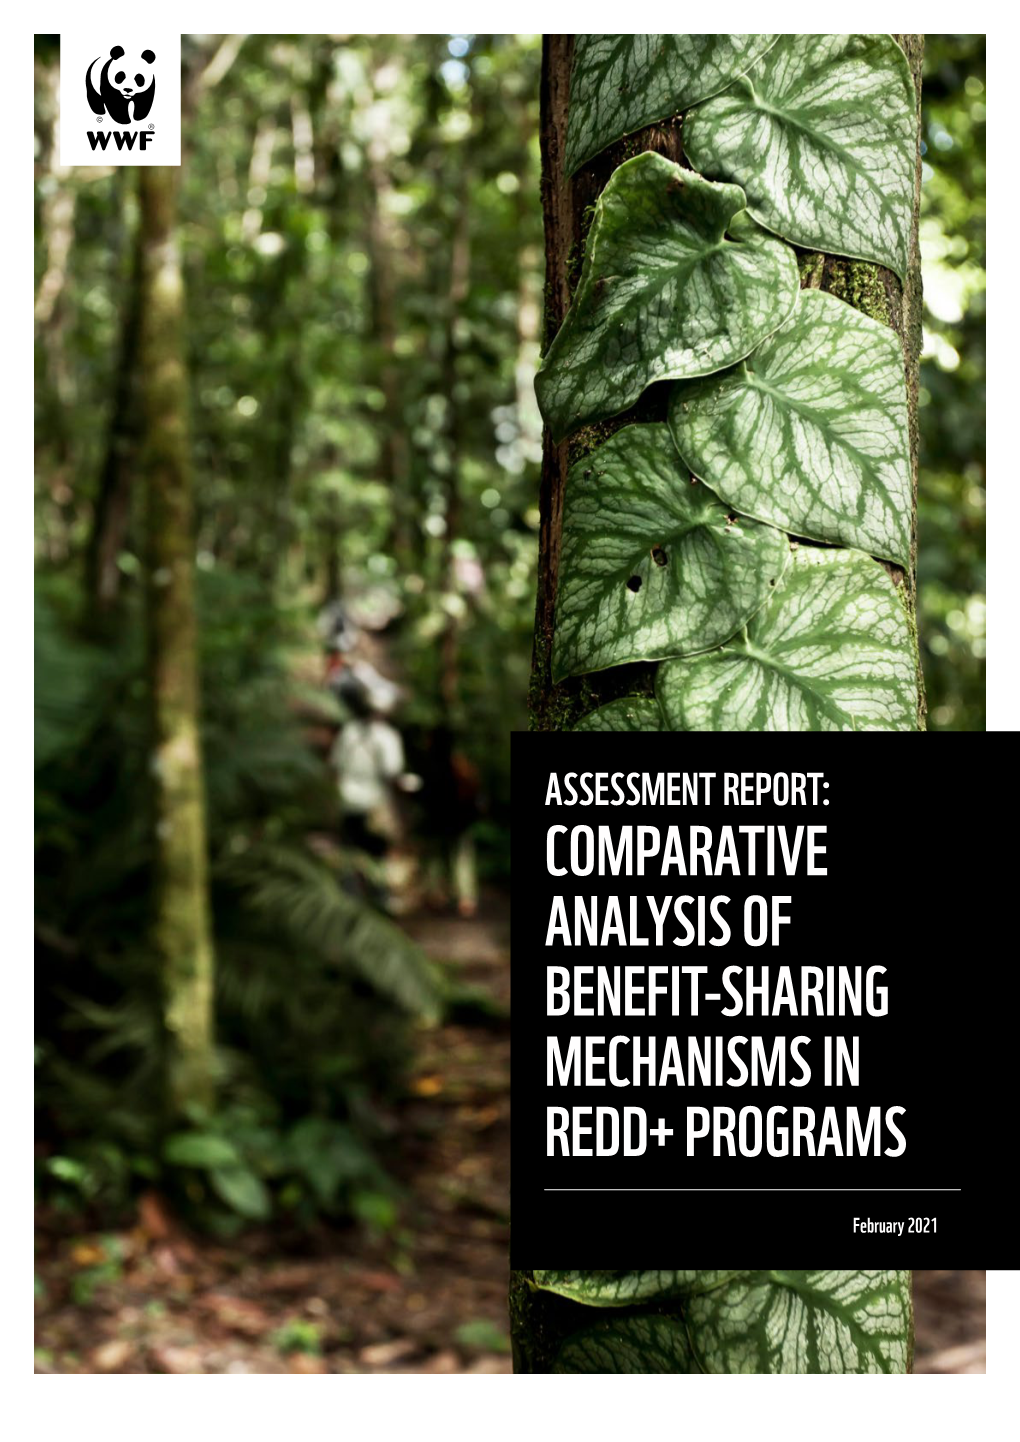 Comparative Analysis of Benefit-Sharing Mechanisms in Redd+ Programs